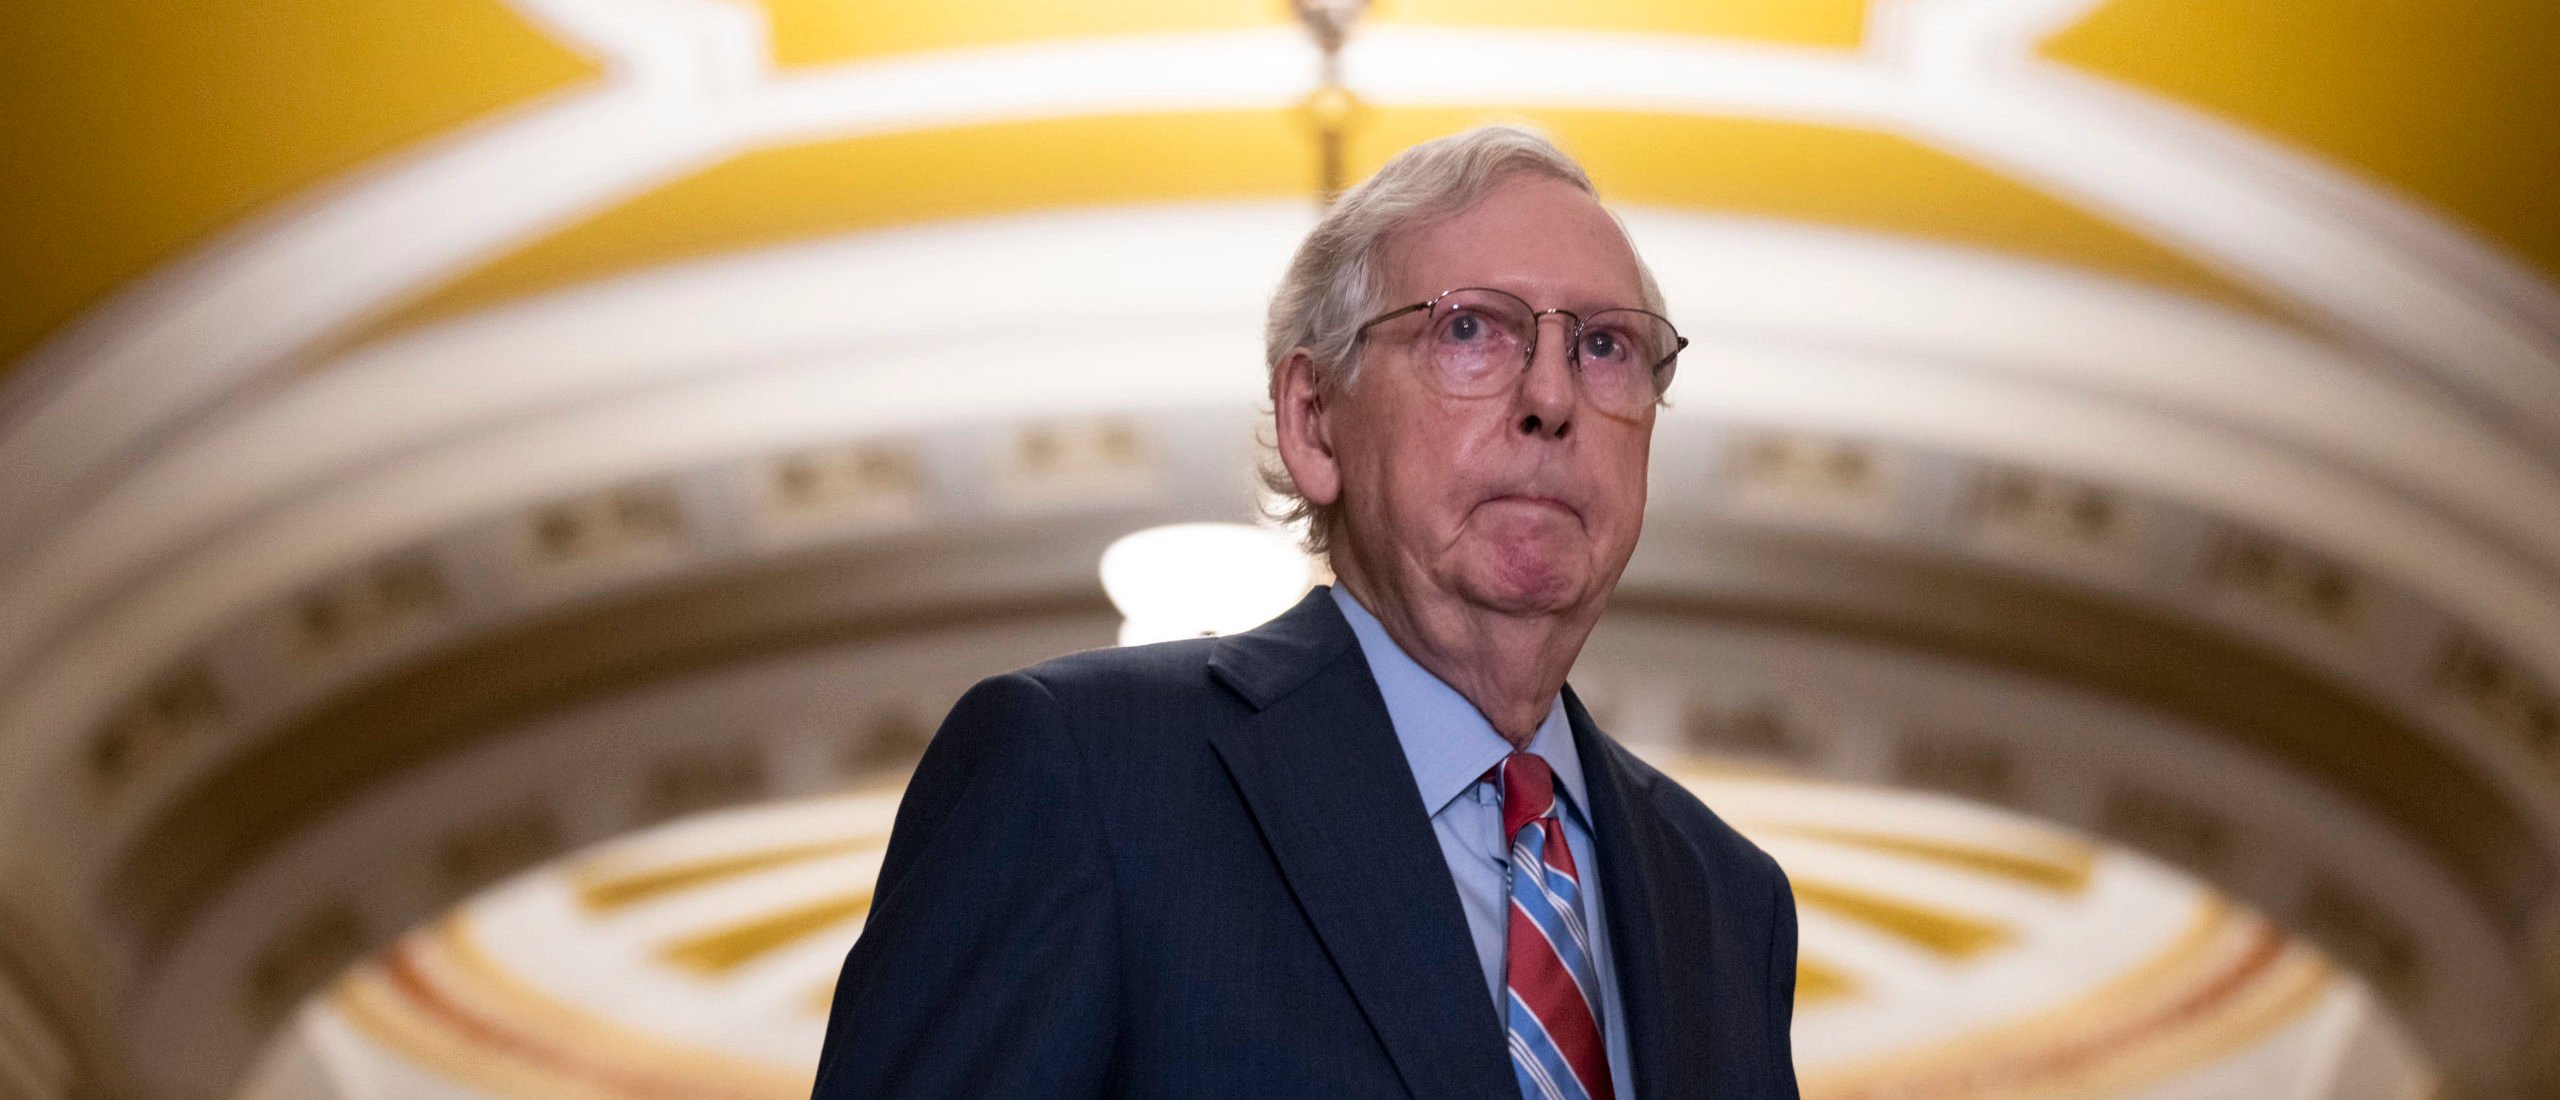 Death Of Mitch McConnell’s Sister-In-Law, Found In A Pond, Under Criminal Investigation